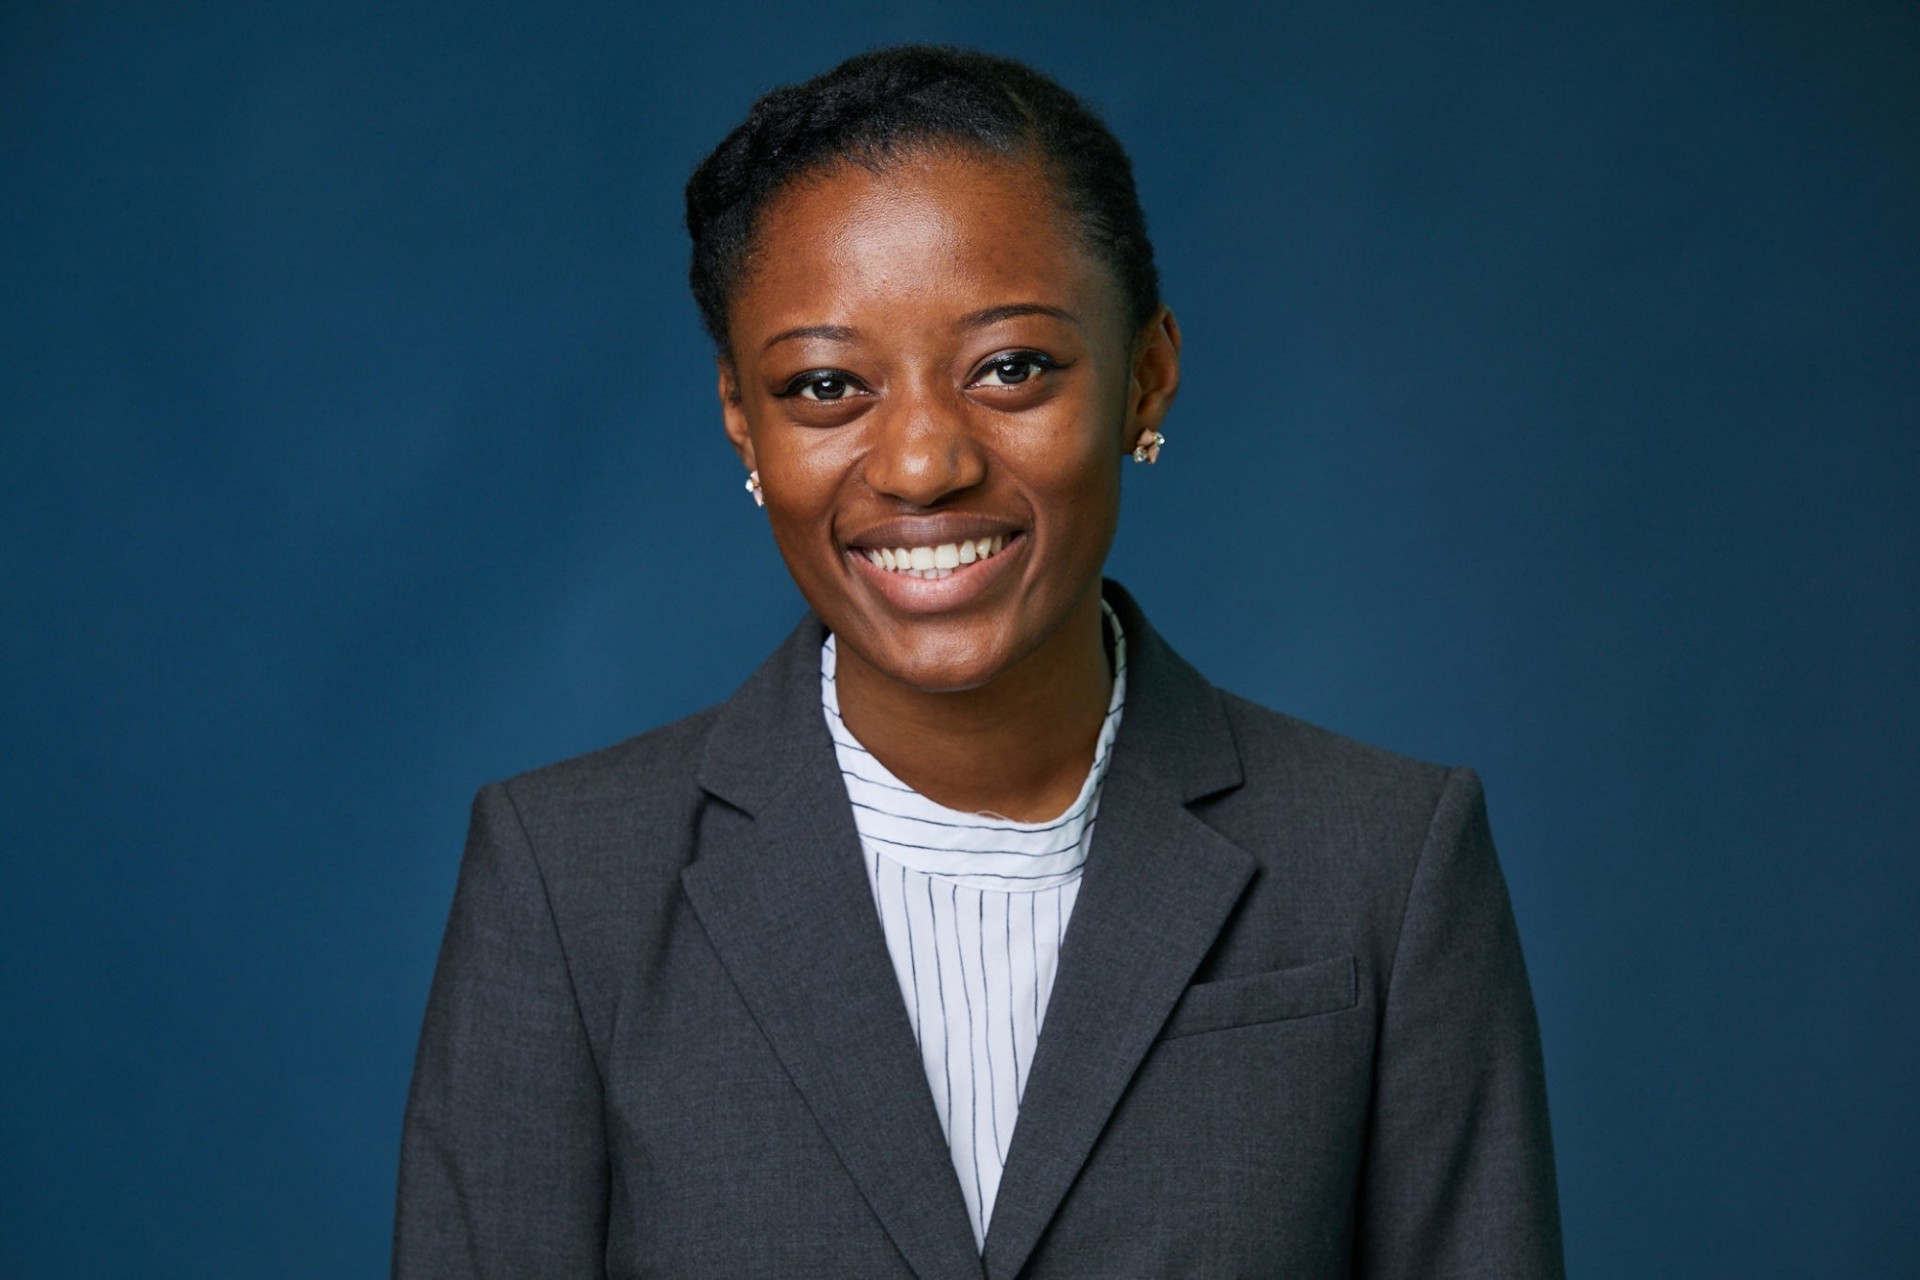 Portrait of Daniela Bushiri, a young female with black hair pulled back, dressed in a grey suit and white stripped shirt, against a dark blue background